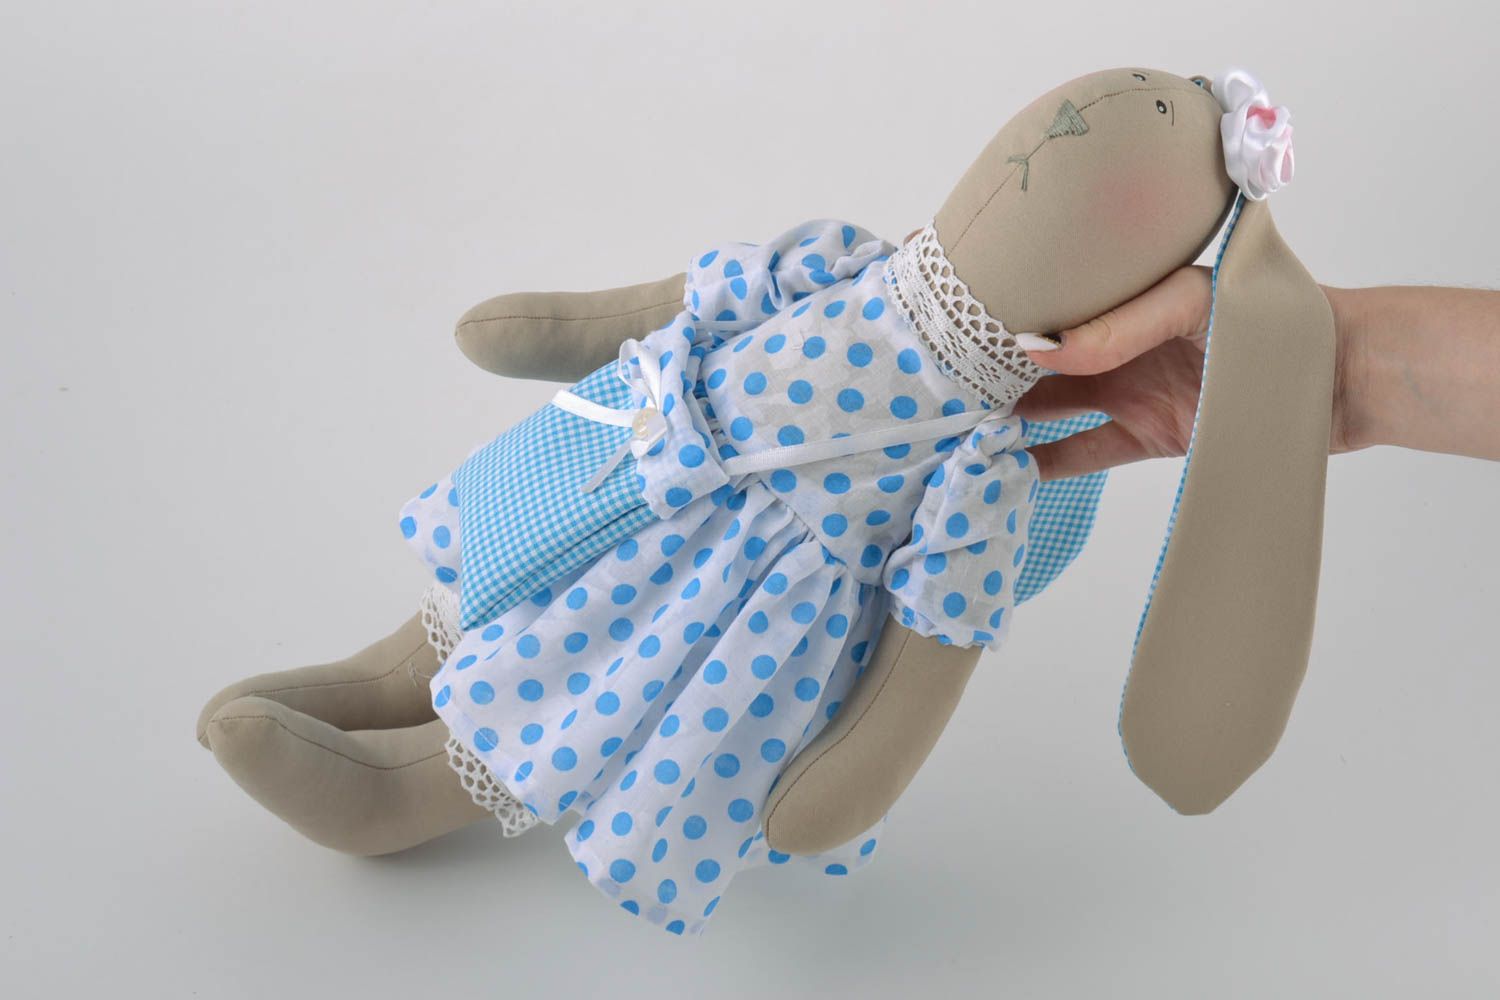 Handmade linen fabric soft toy rabbit in blue polka dot dress with small bag photo 3